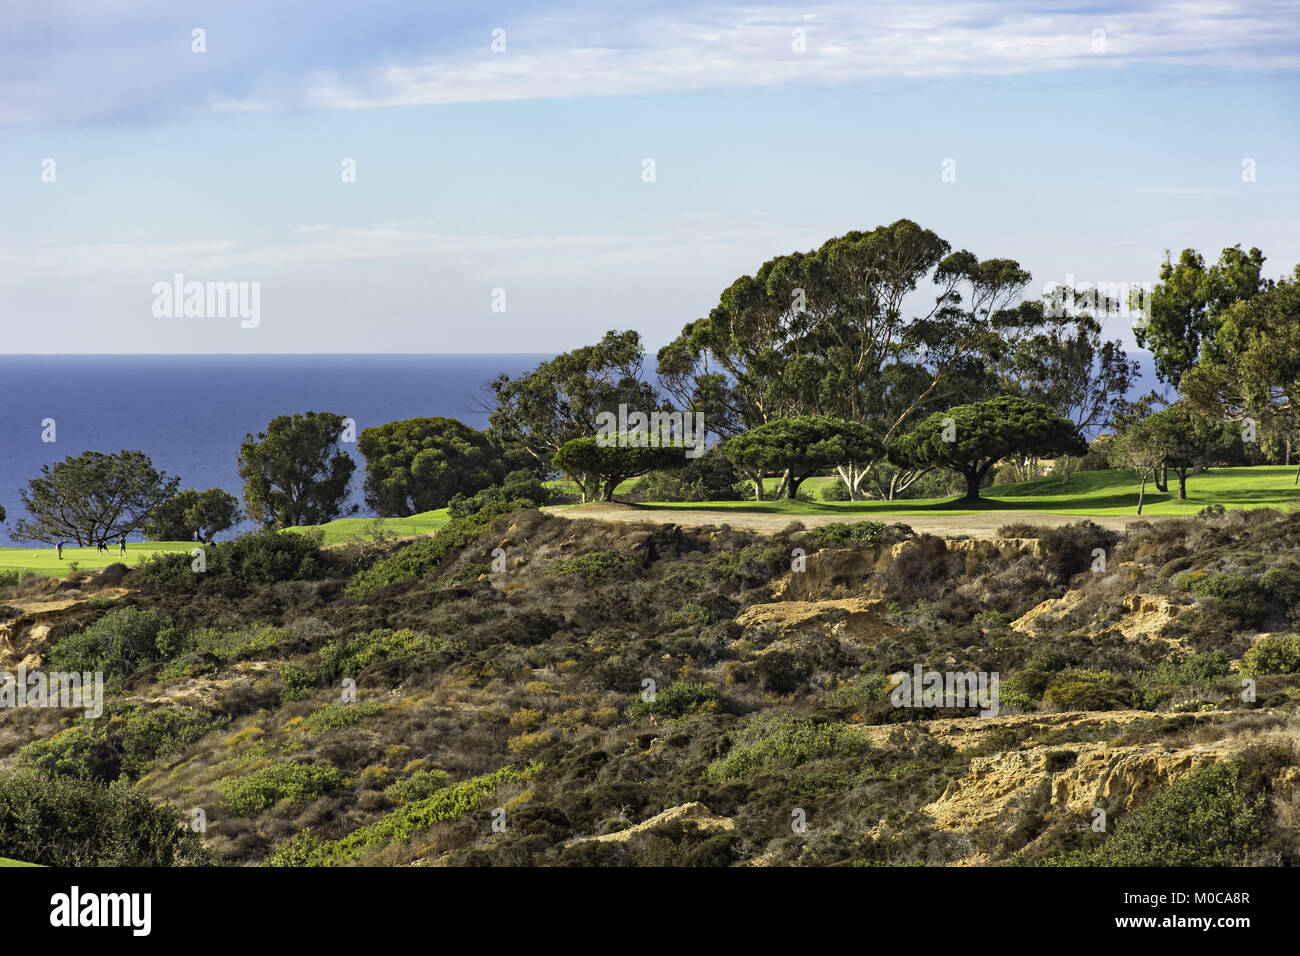 Golf Course at Torrey Pines with cliffs and Pacific Ocean in the background La Jolla California USA near San Diego Stock Photo